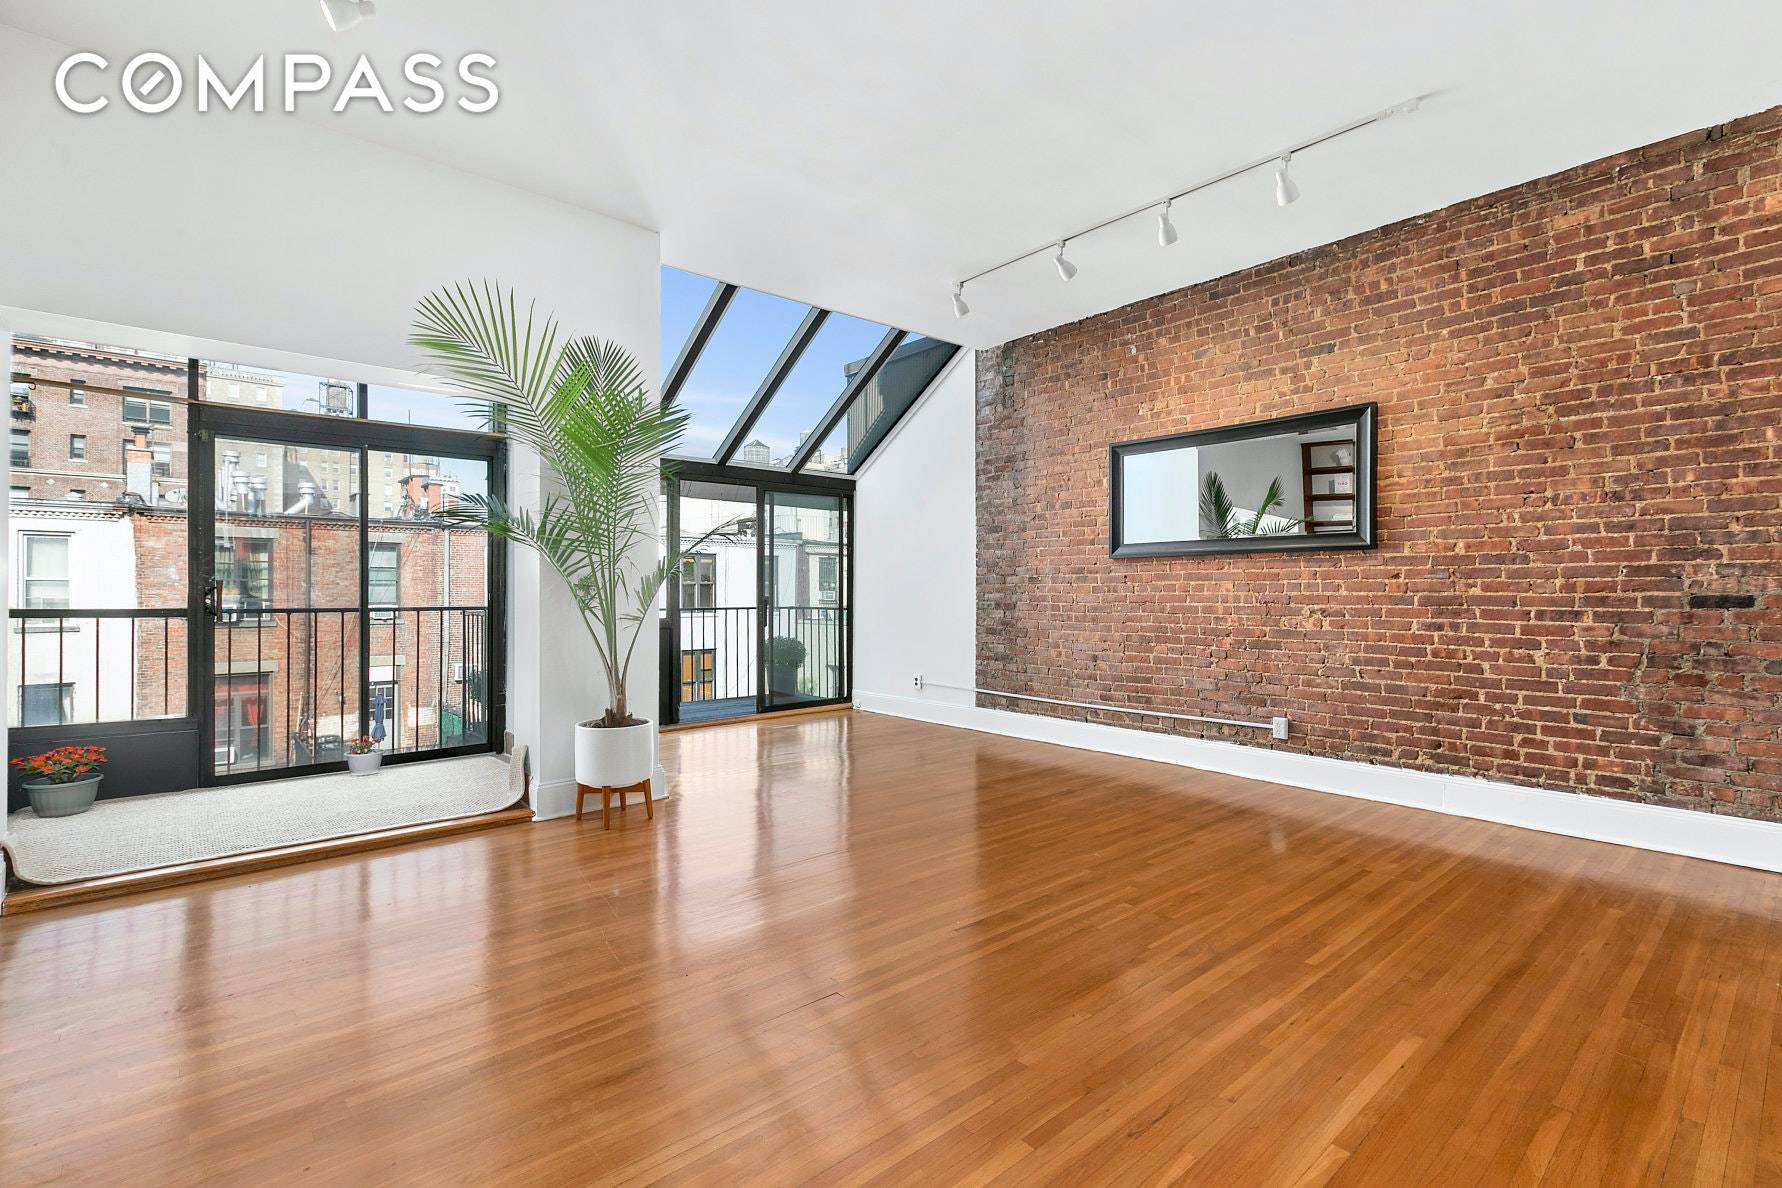 341 West 87th Street is situated on a beautiful, tranquil, tree lined block near Riverside Park.